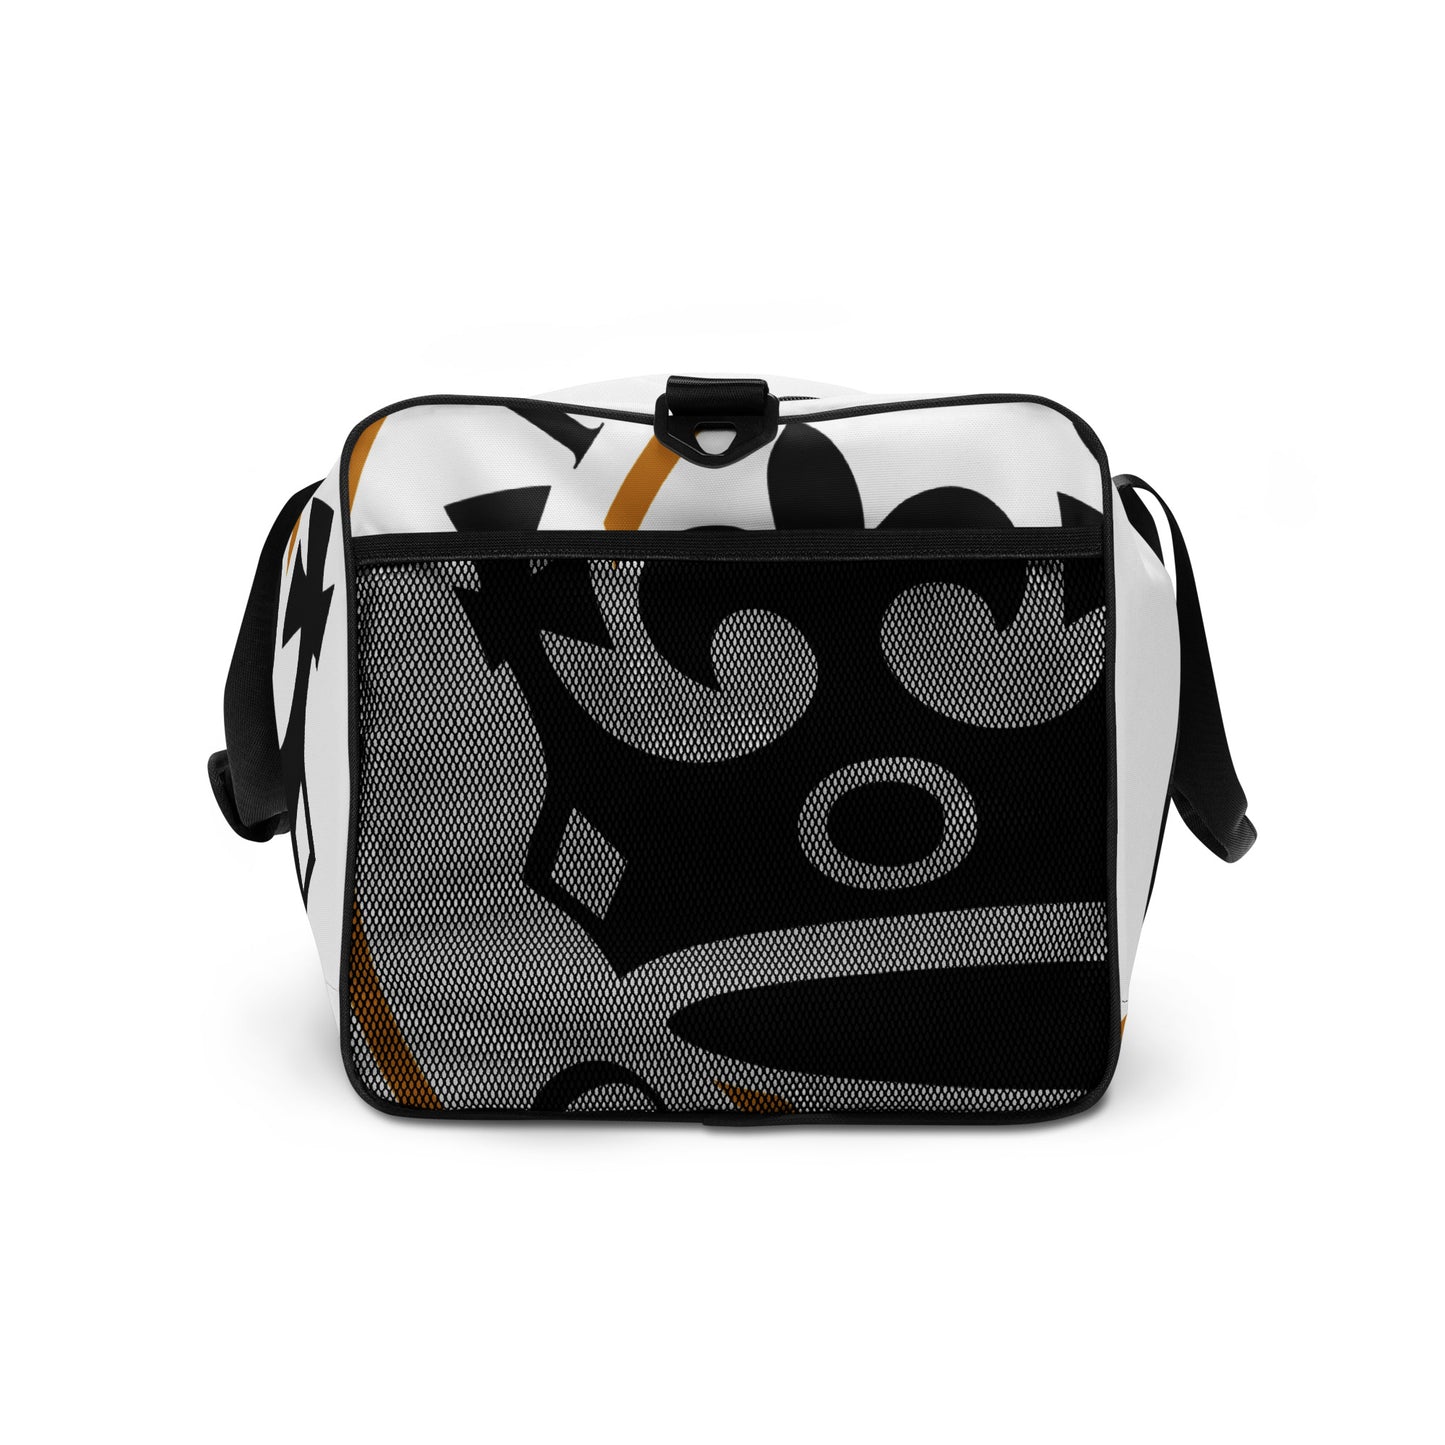 Black and Gold/ White Pageant Life Certified Duffle bag